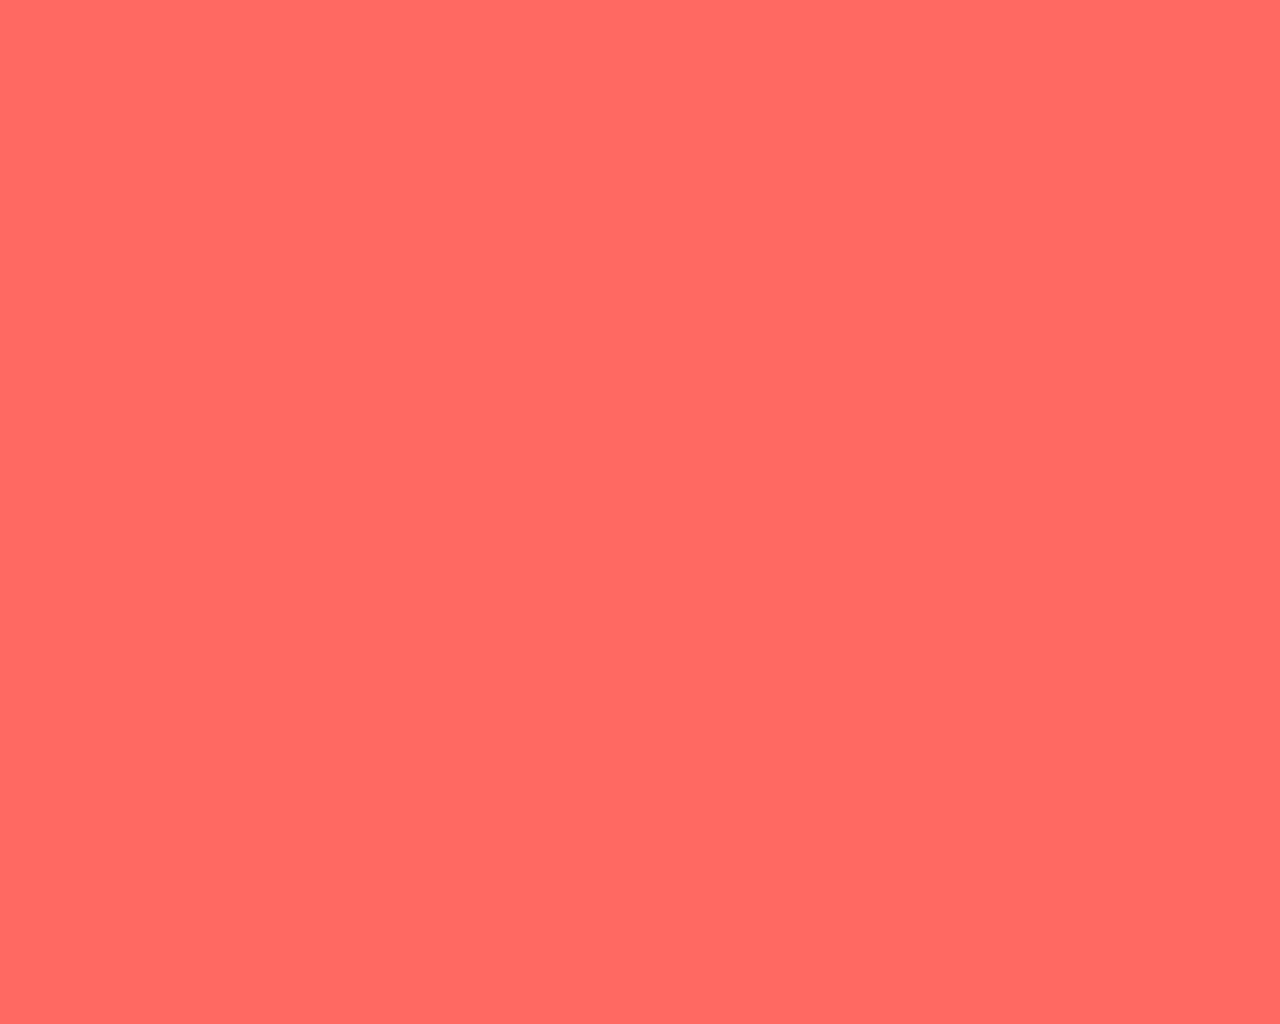 1280x1024 Pastel Red Solid Color Background